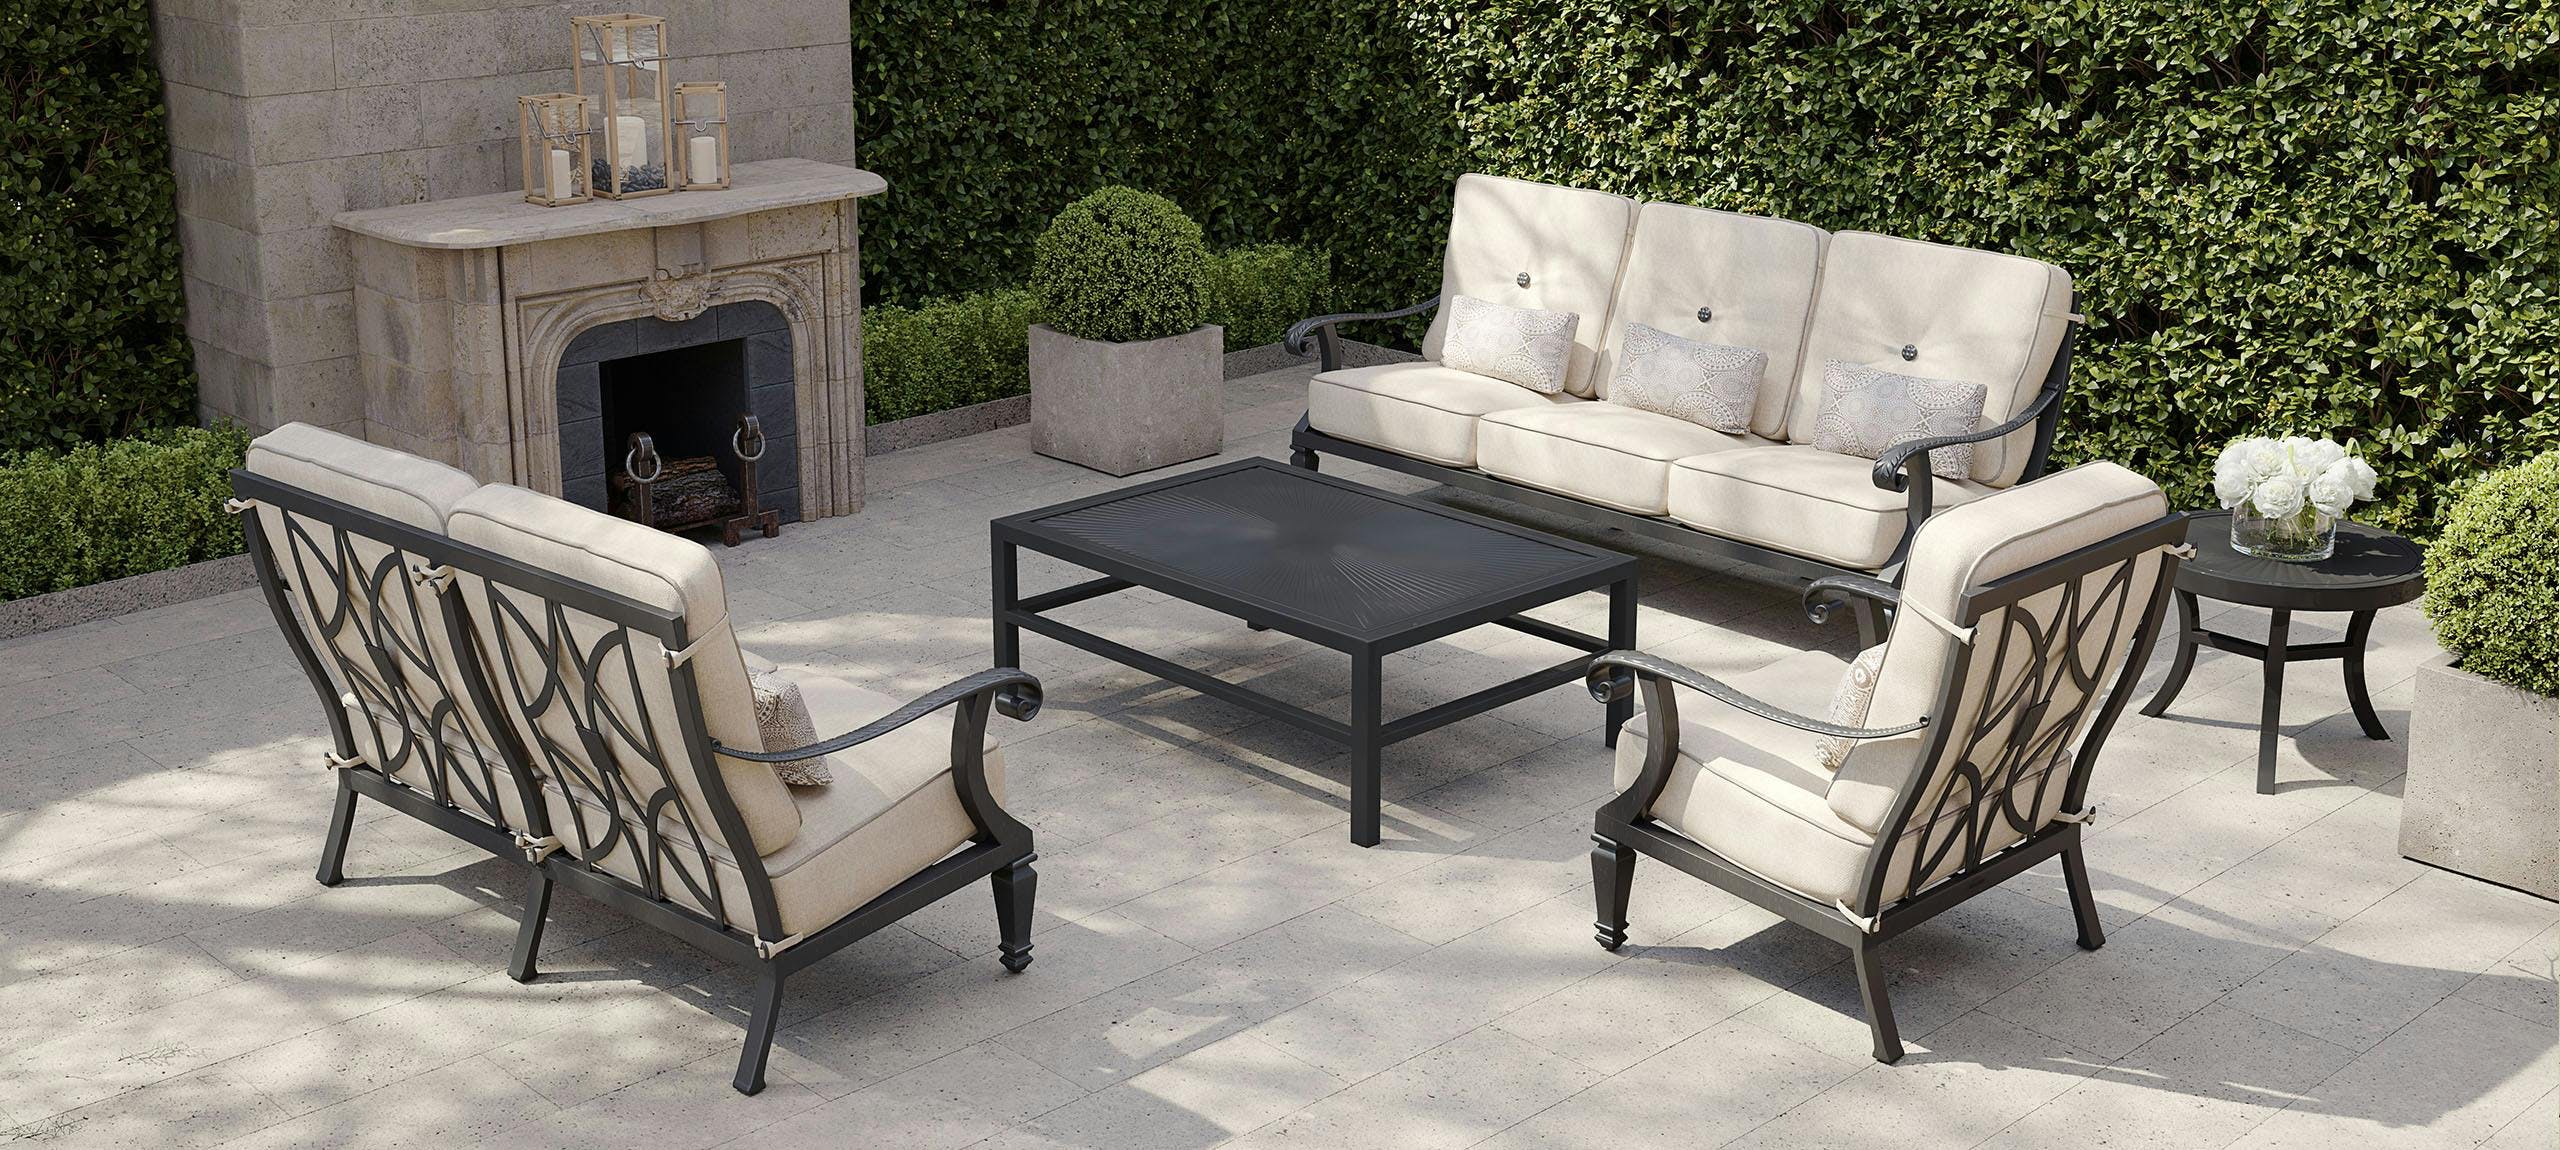 Bellagio Deep Seating Set By Castelle